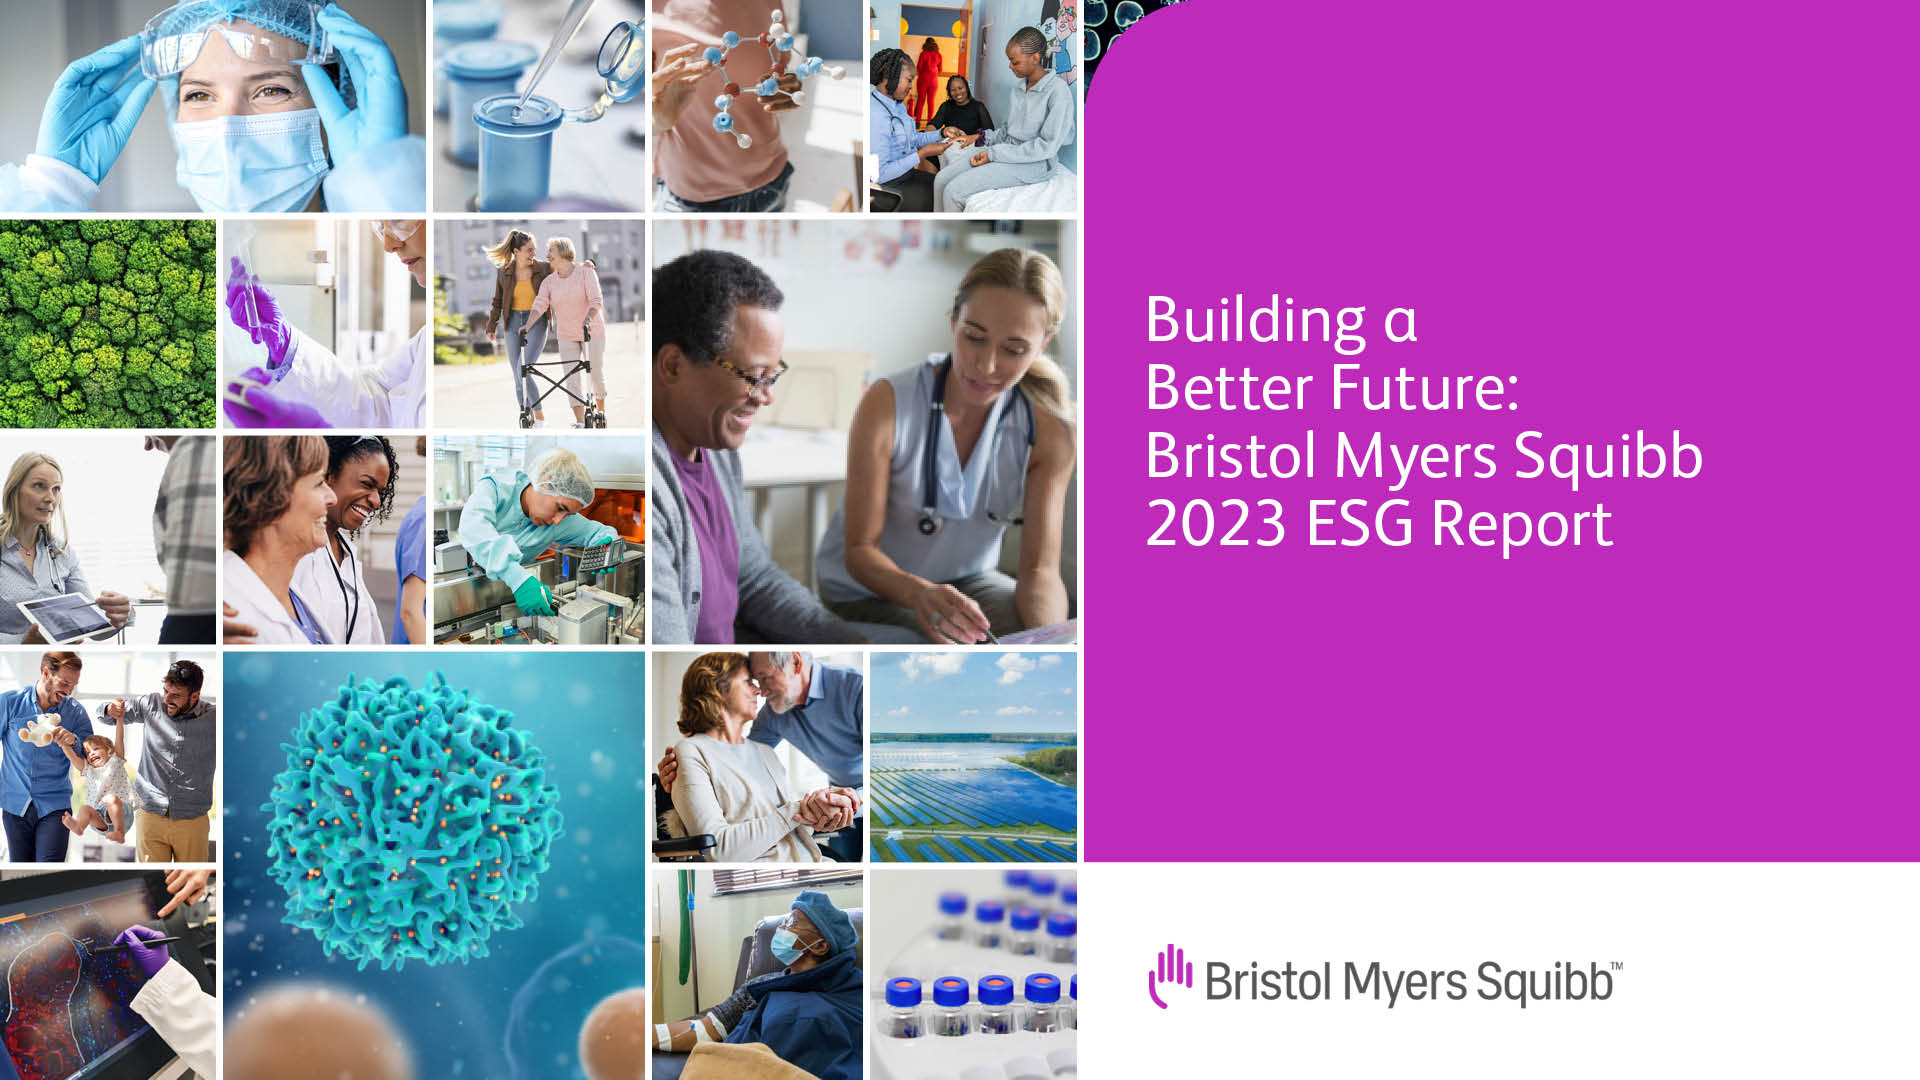 BMS Report Cover: "Building a Better Future Bristol Myers Squibb 2023 ESG Report"